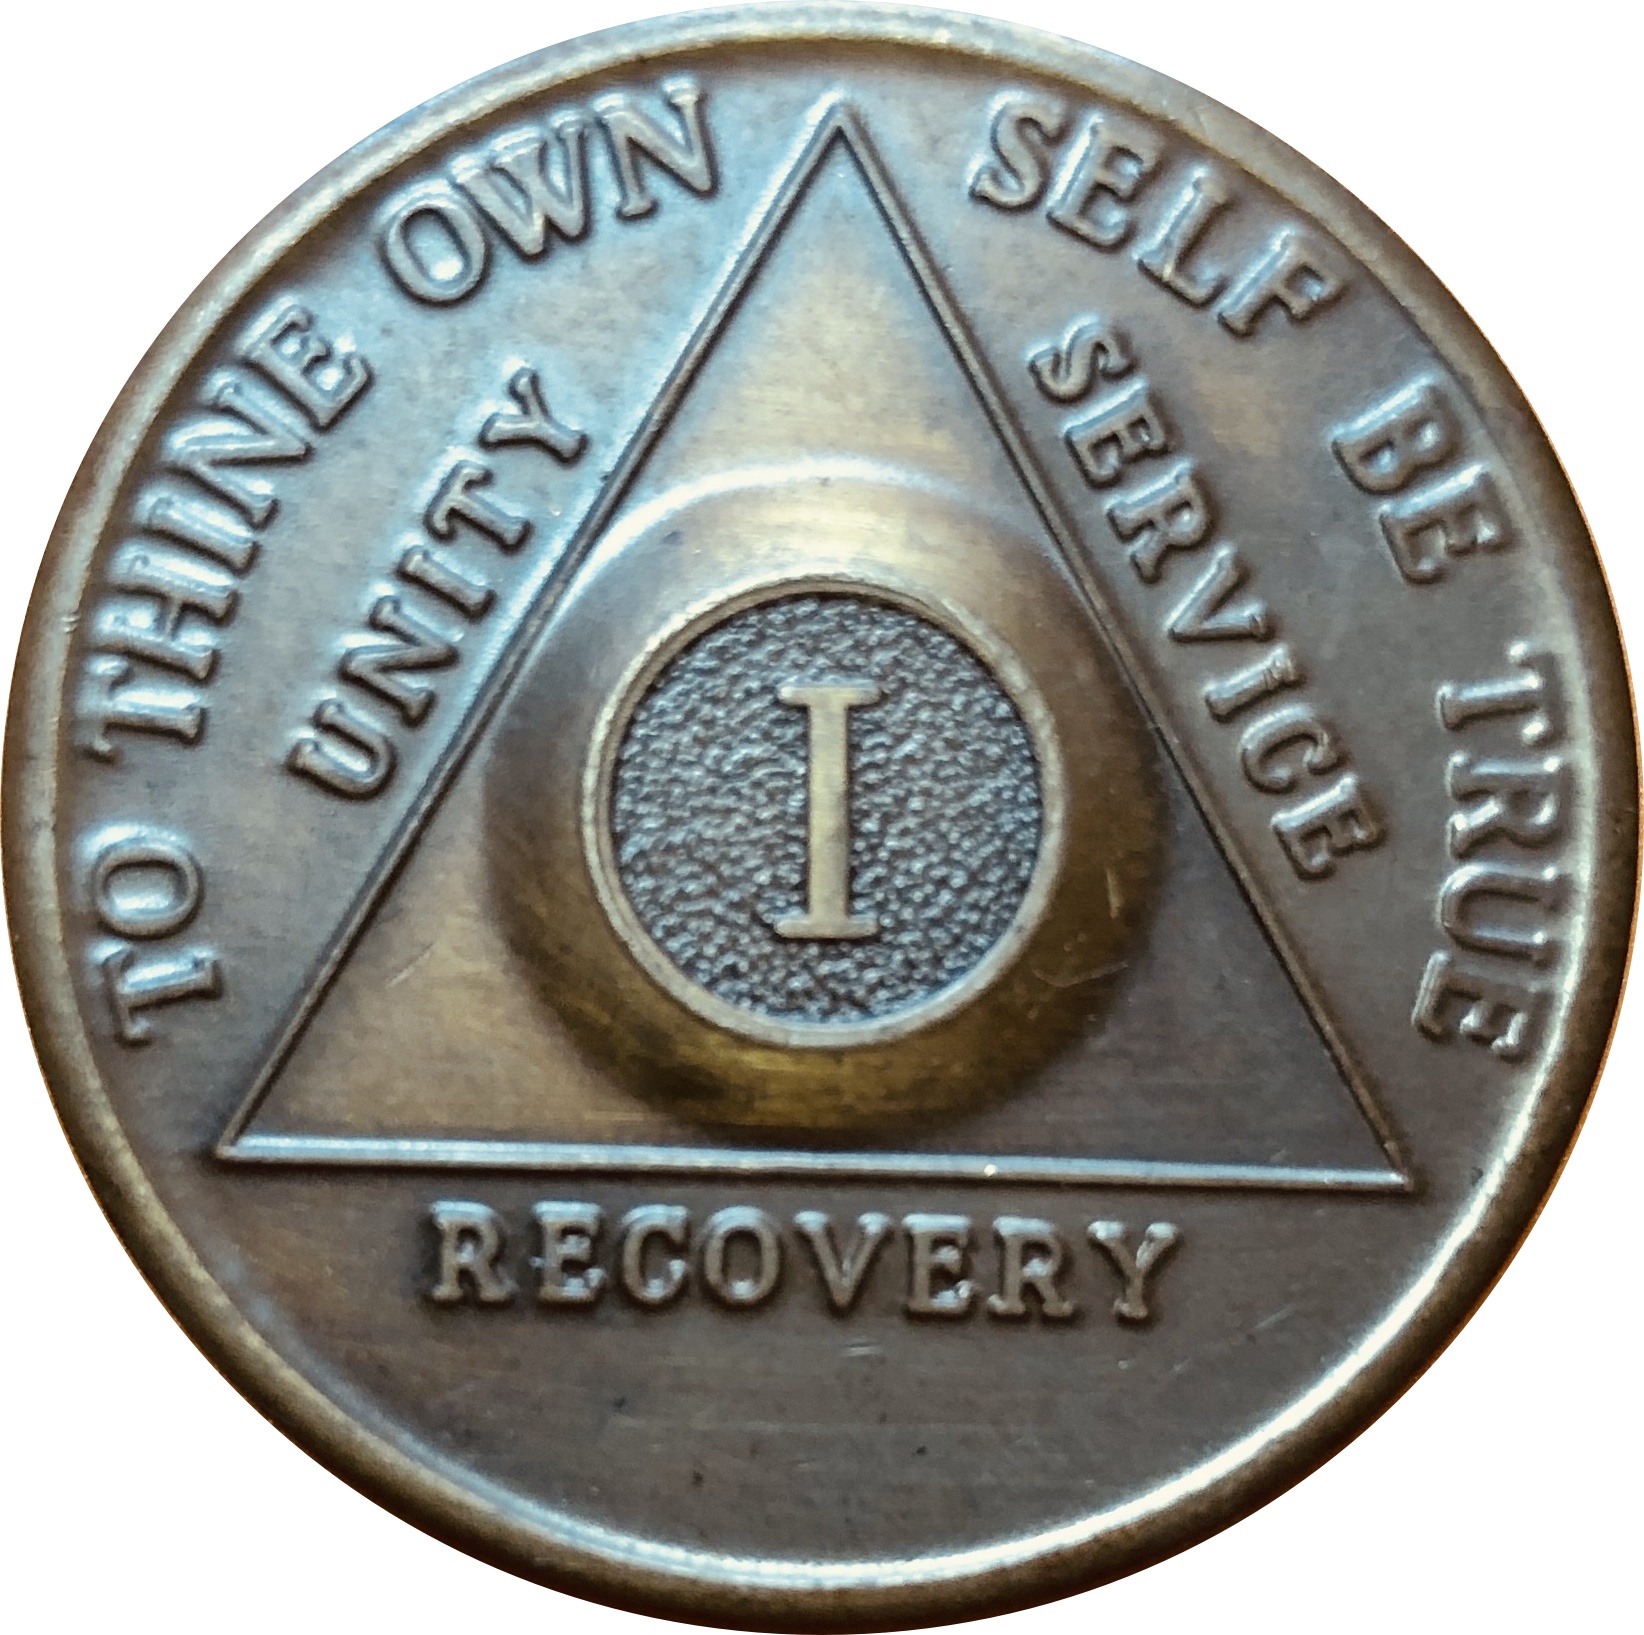 What is Eminem's sobriety date and what does the coin mean? - Radio X